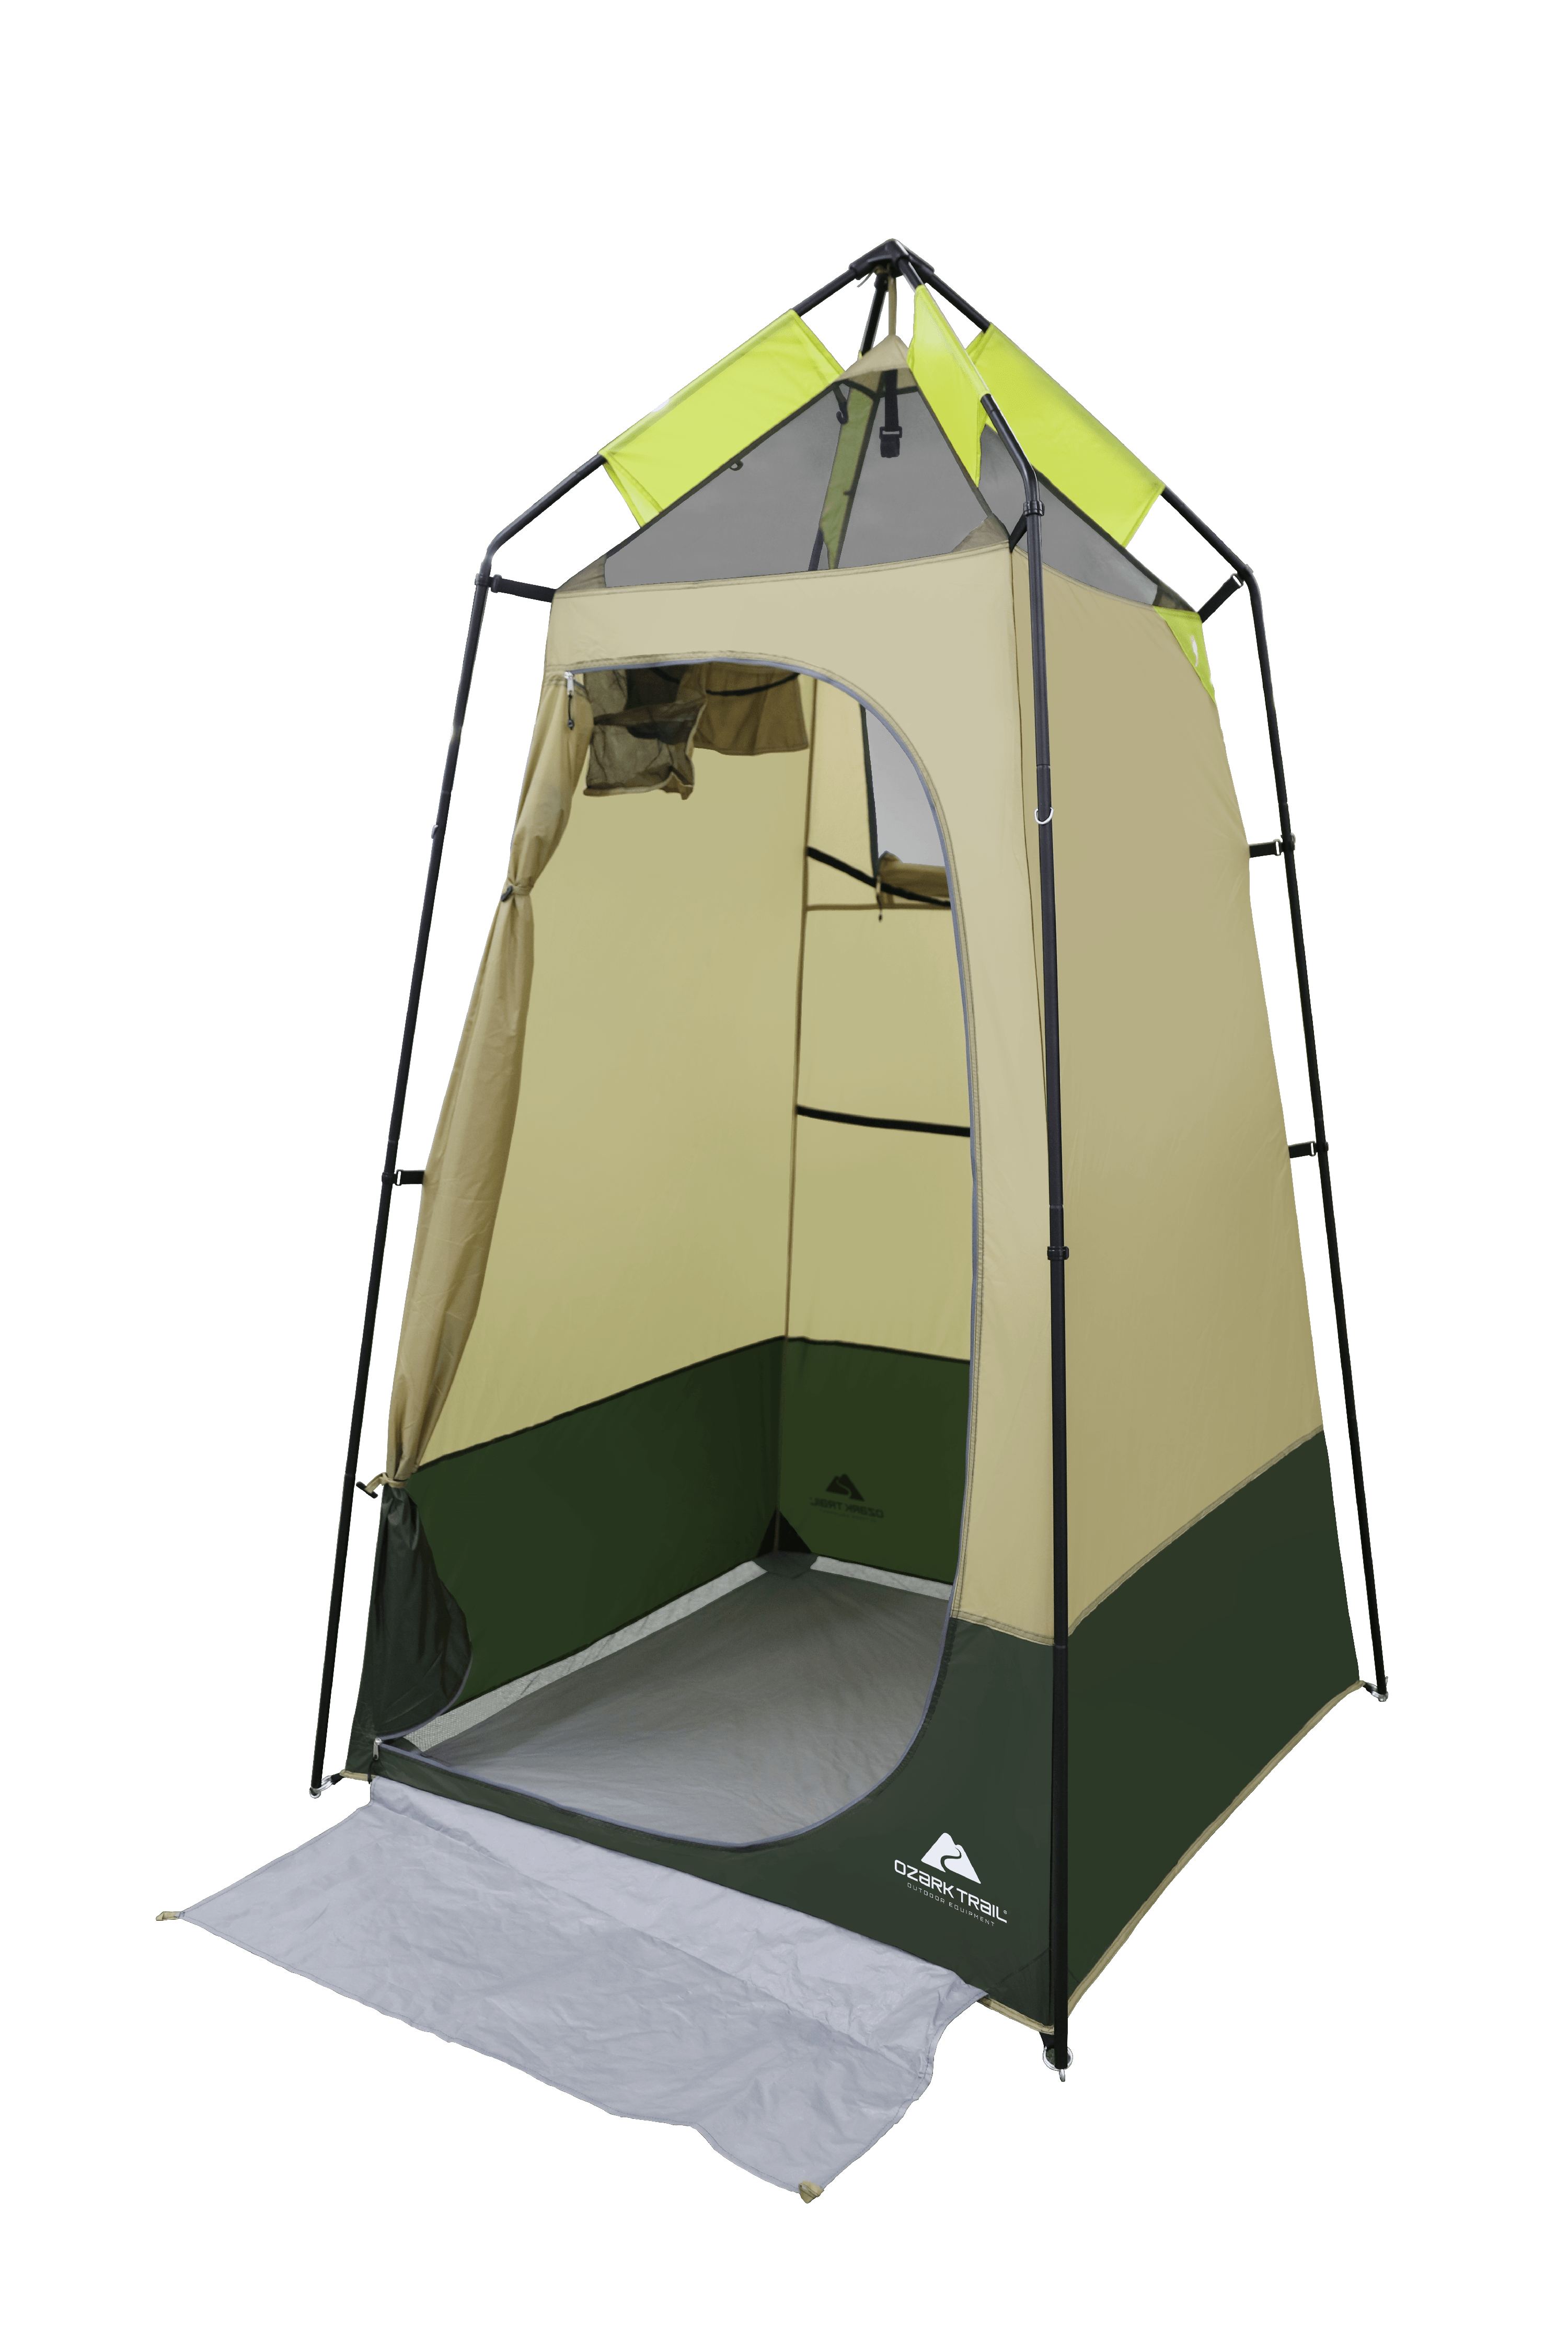 Ozark Trail Hazel Creek Lighted Privacy Tent One Room, Green - image 3 of 10